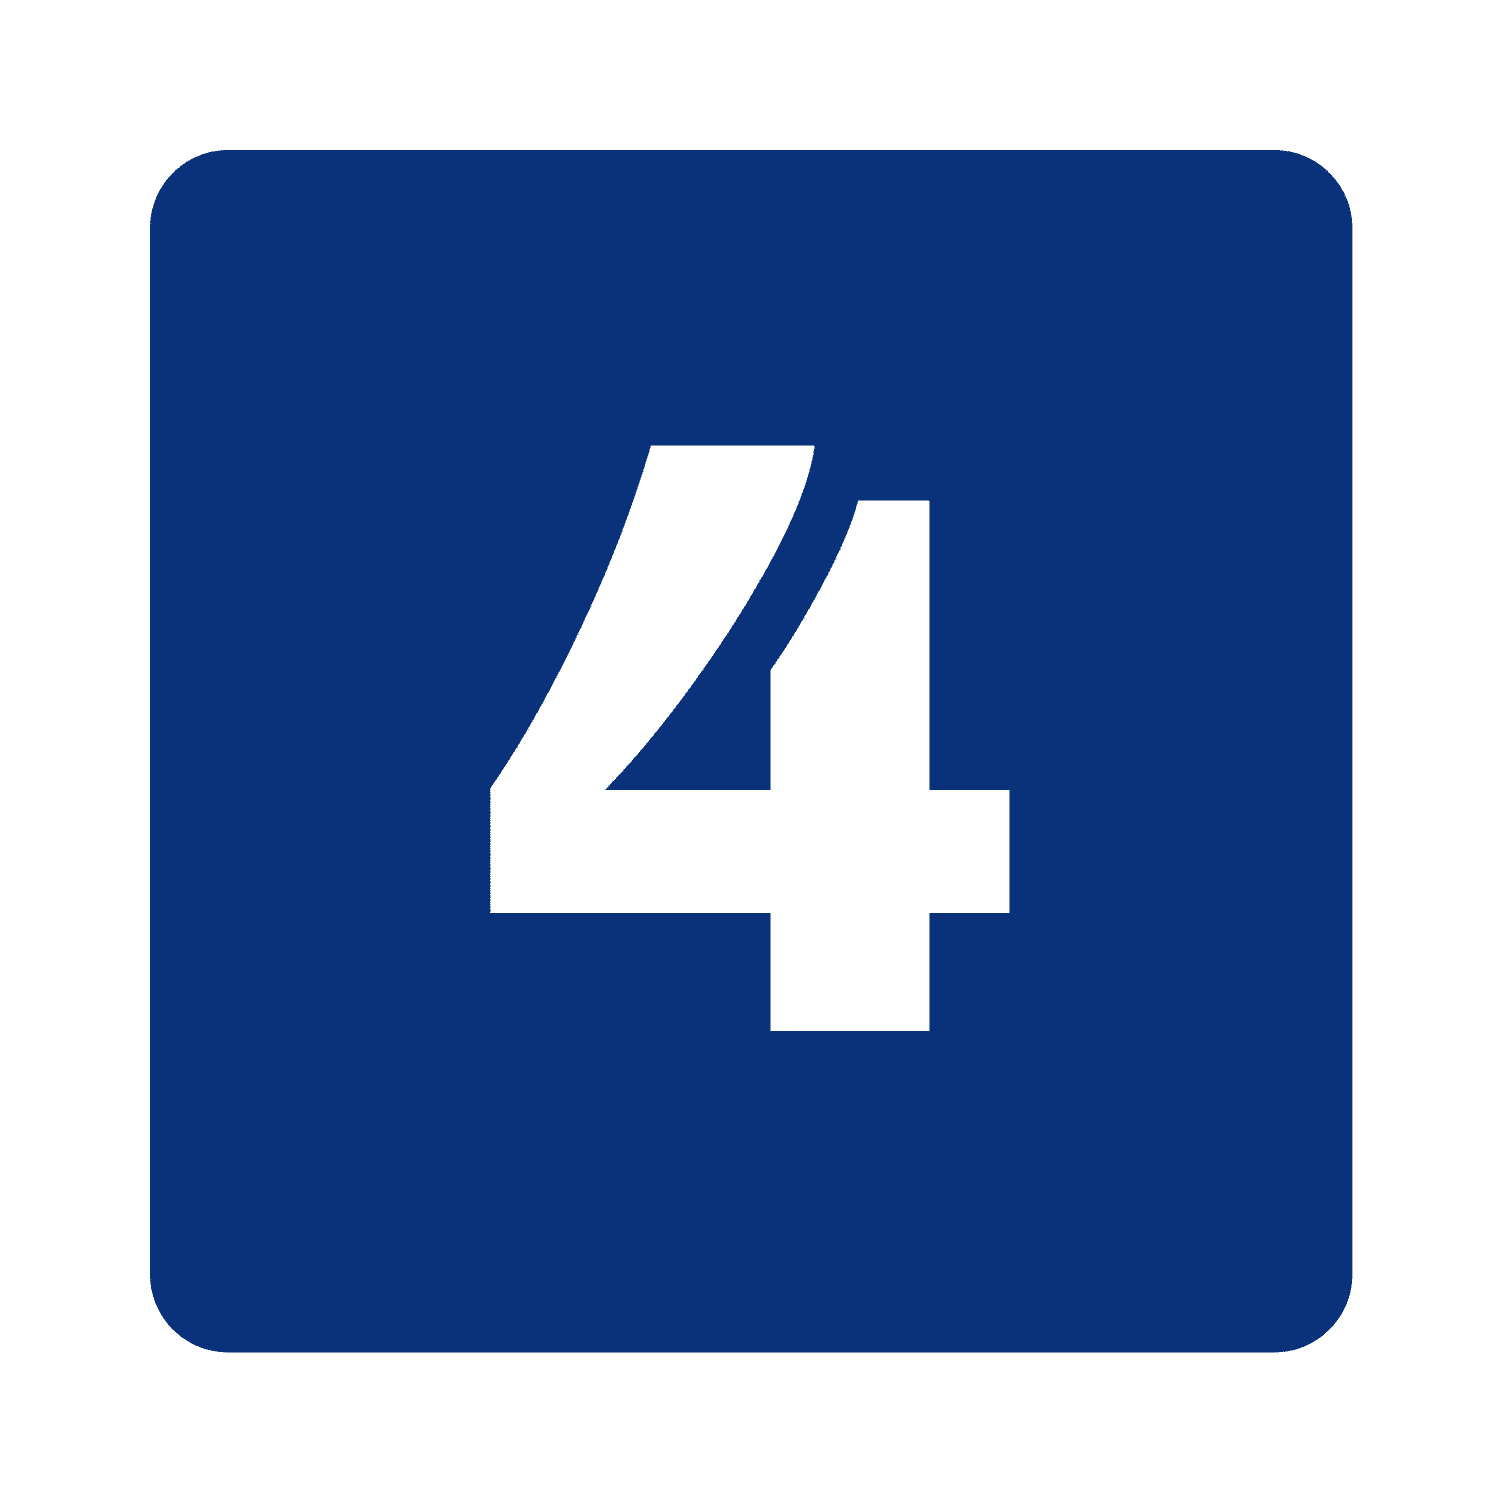 Icon of a number 4 against blue square background